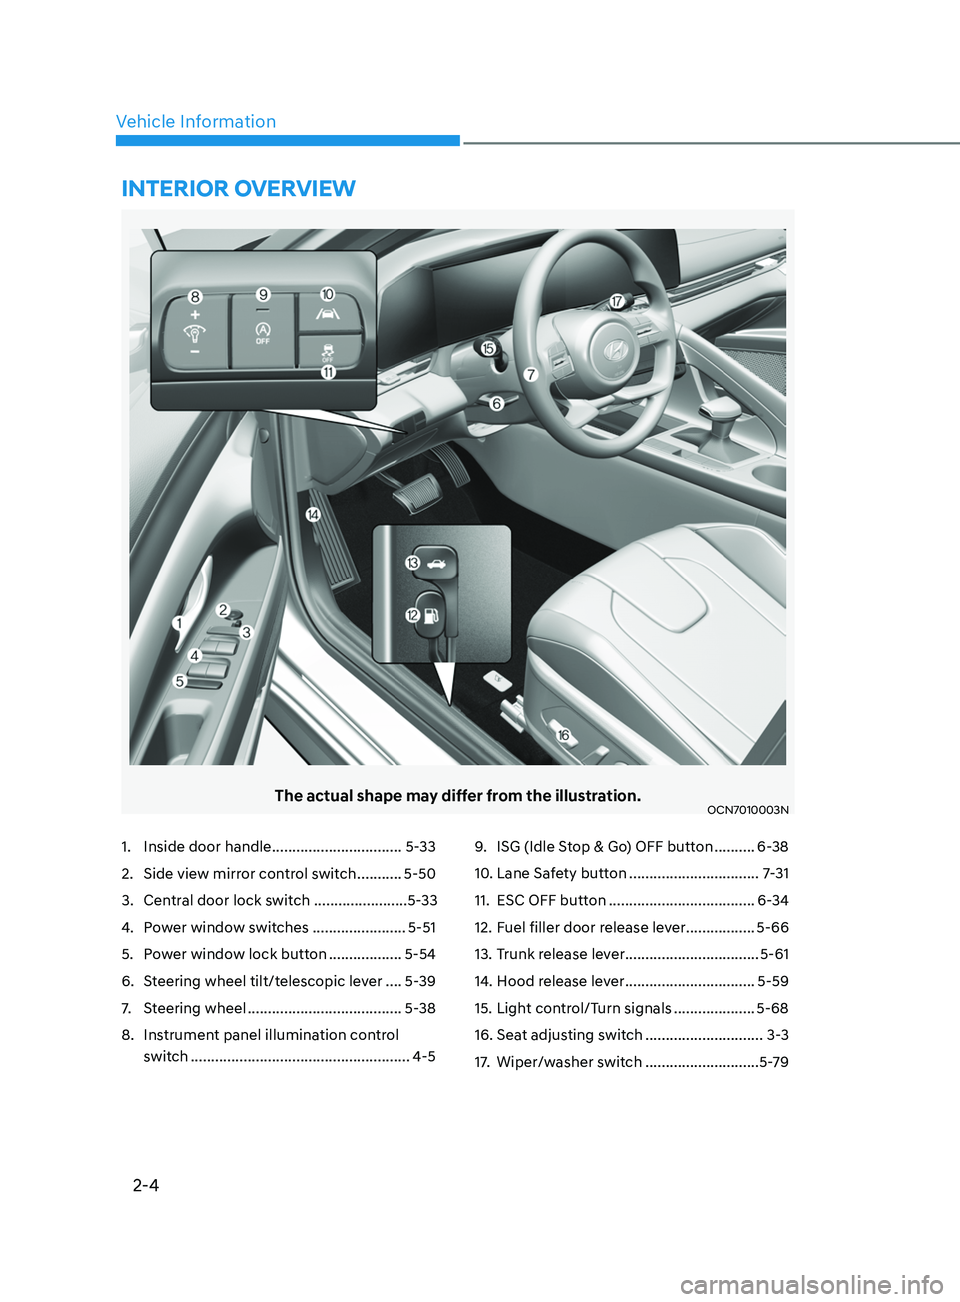 HYUNDAI ELANTRA SEL 2021  Owners Manual 2-4
Vehicle Information
The actual shape may differ from the illustration.OCN7010003N
1.Inside door handle ................................ 5-33
2.
 Side view mirror con
 trol switch
 ...........5-50
